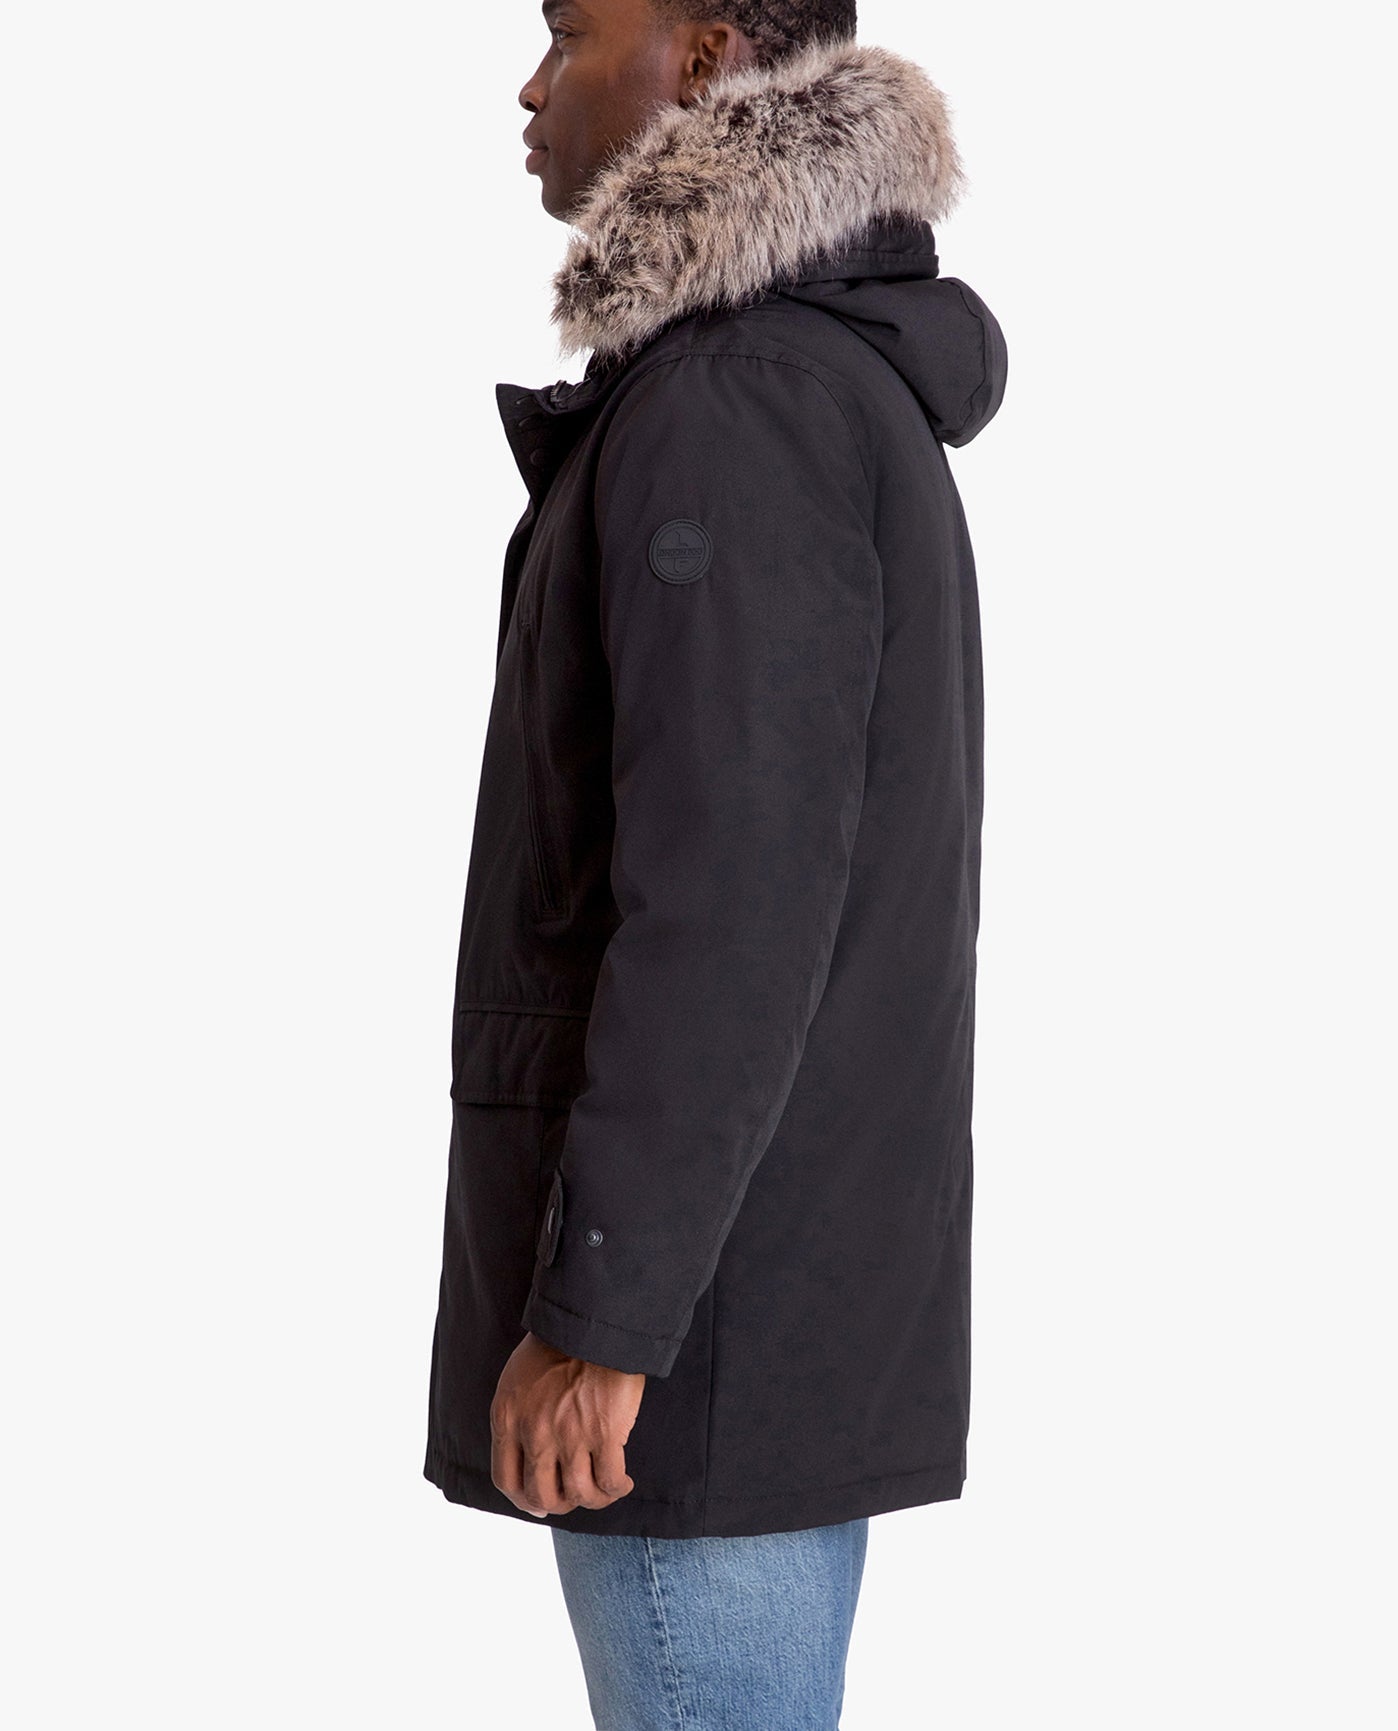 SIDE VIEW OF ARTIC PARKA WITH REMOVABLE FAUX FUR TRIMMED HOOD | BLACK